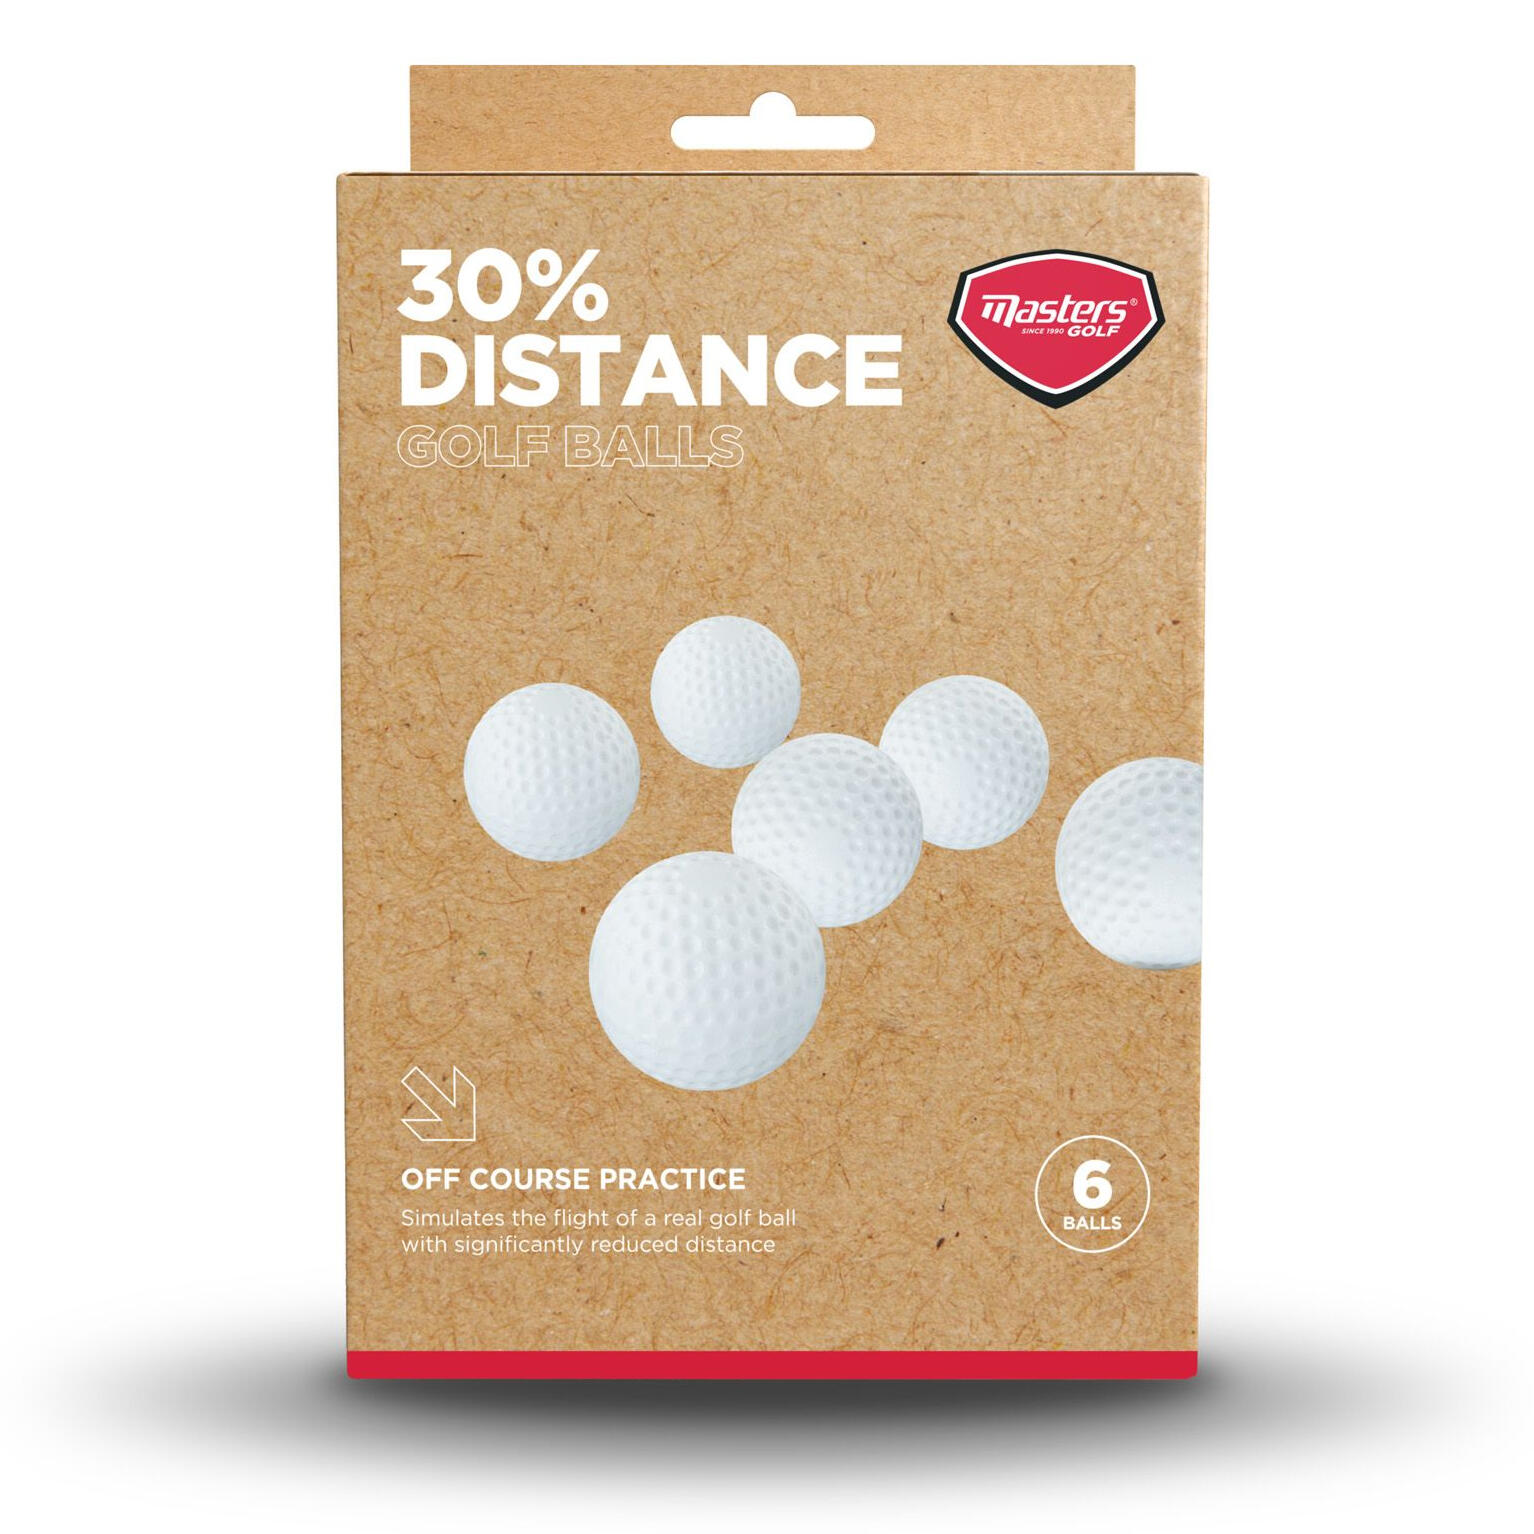 MASTERS GOLF Masters 30% Distance Golf Balls - 6 Pack